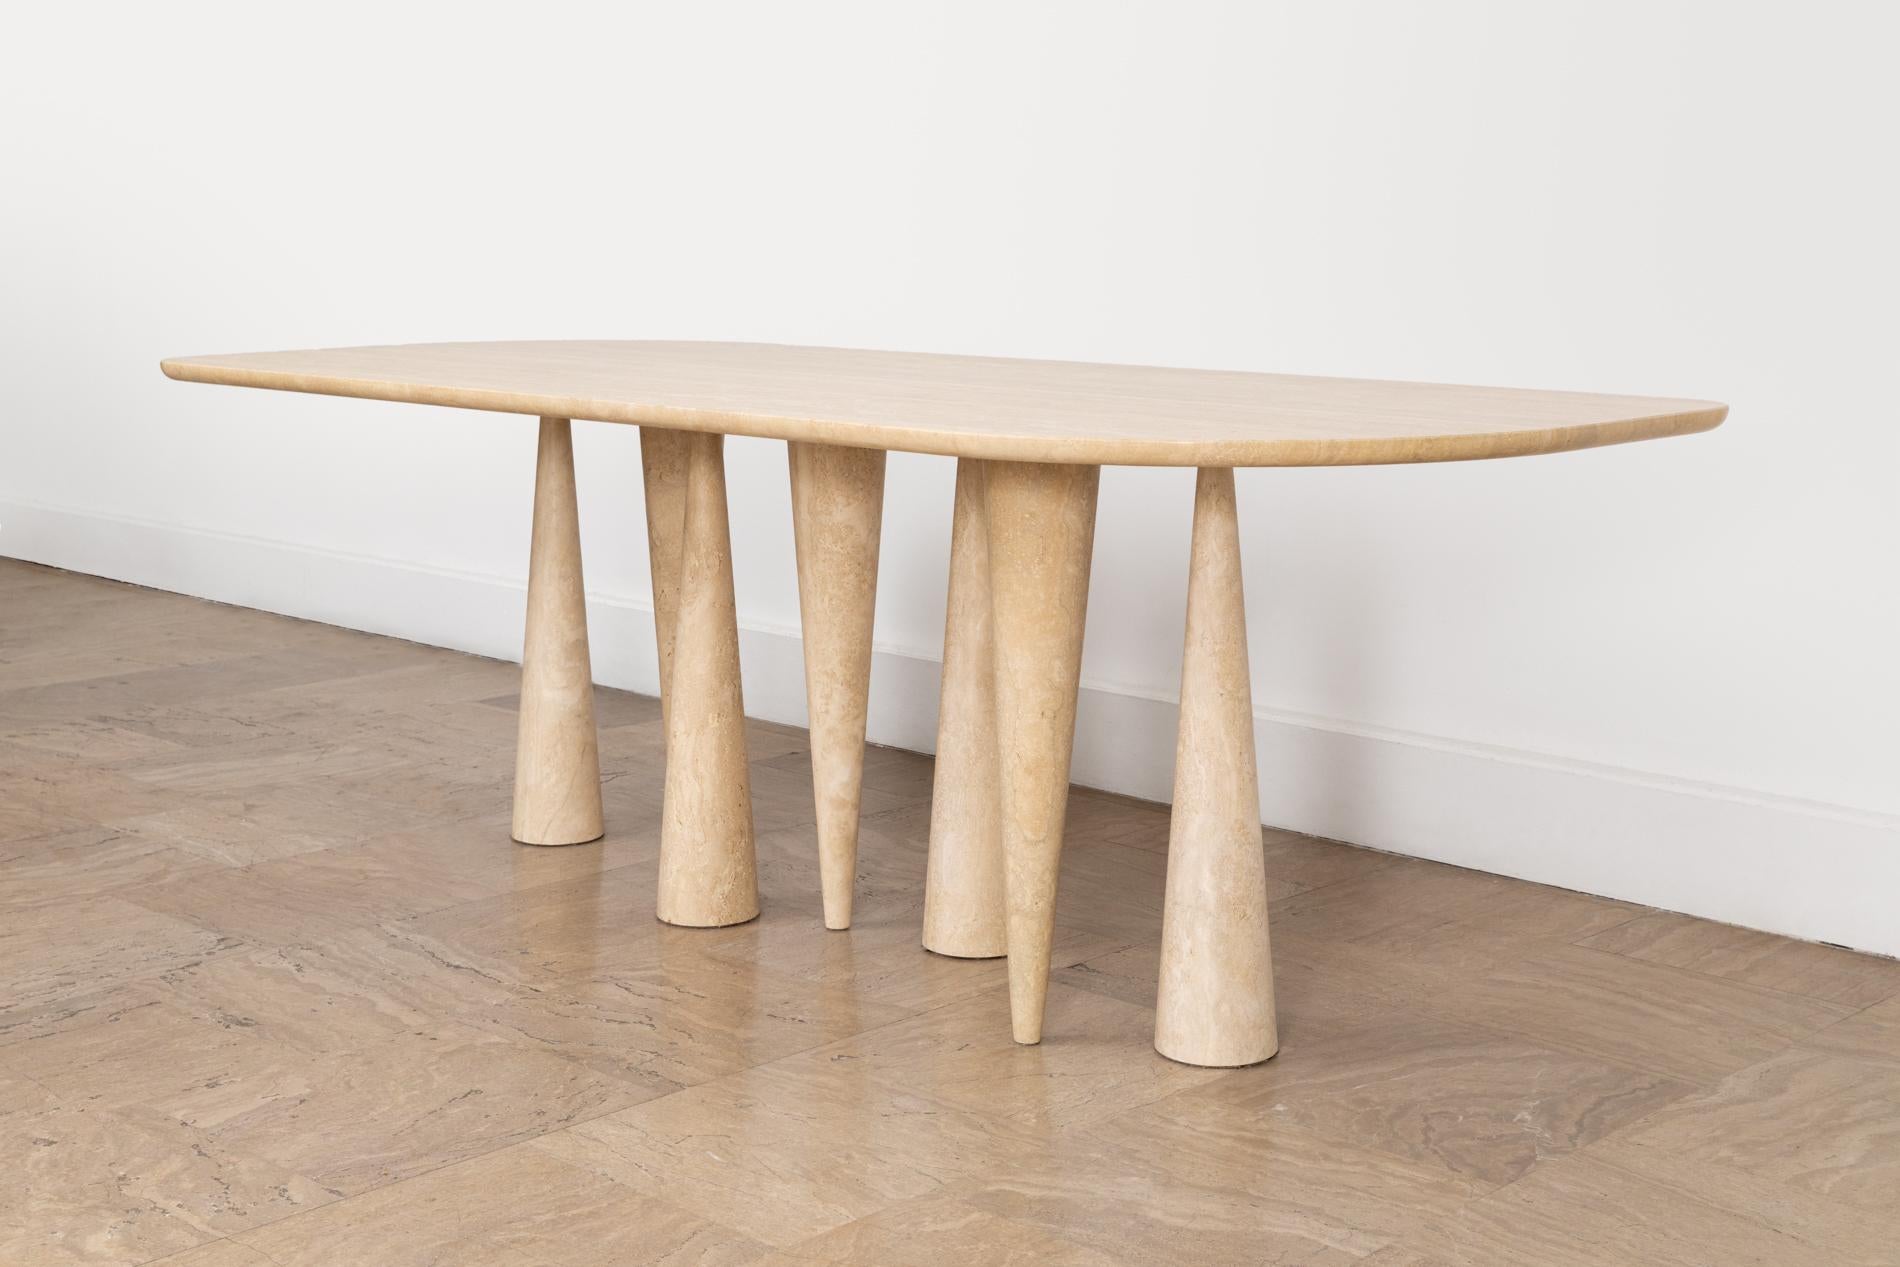 Silvia medium dining table by Moure Studio
Dimensions: D 80 x W 40 x H 80 cm.
Materials: Travertine.
Also available in different dimensions. 

Dining table made of travertine. Silvia translates its mineral inspiration into abstract shapes which